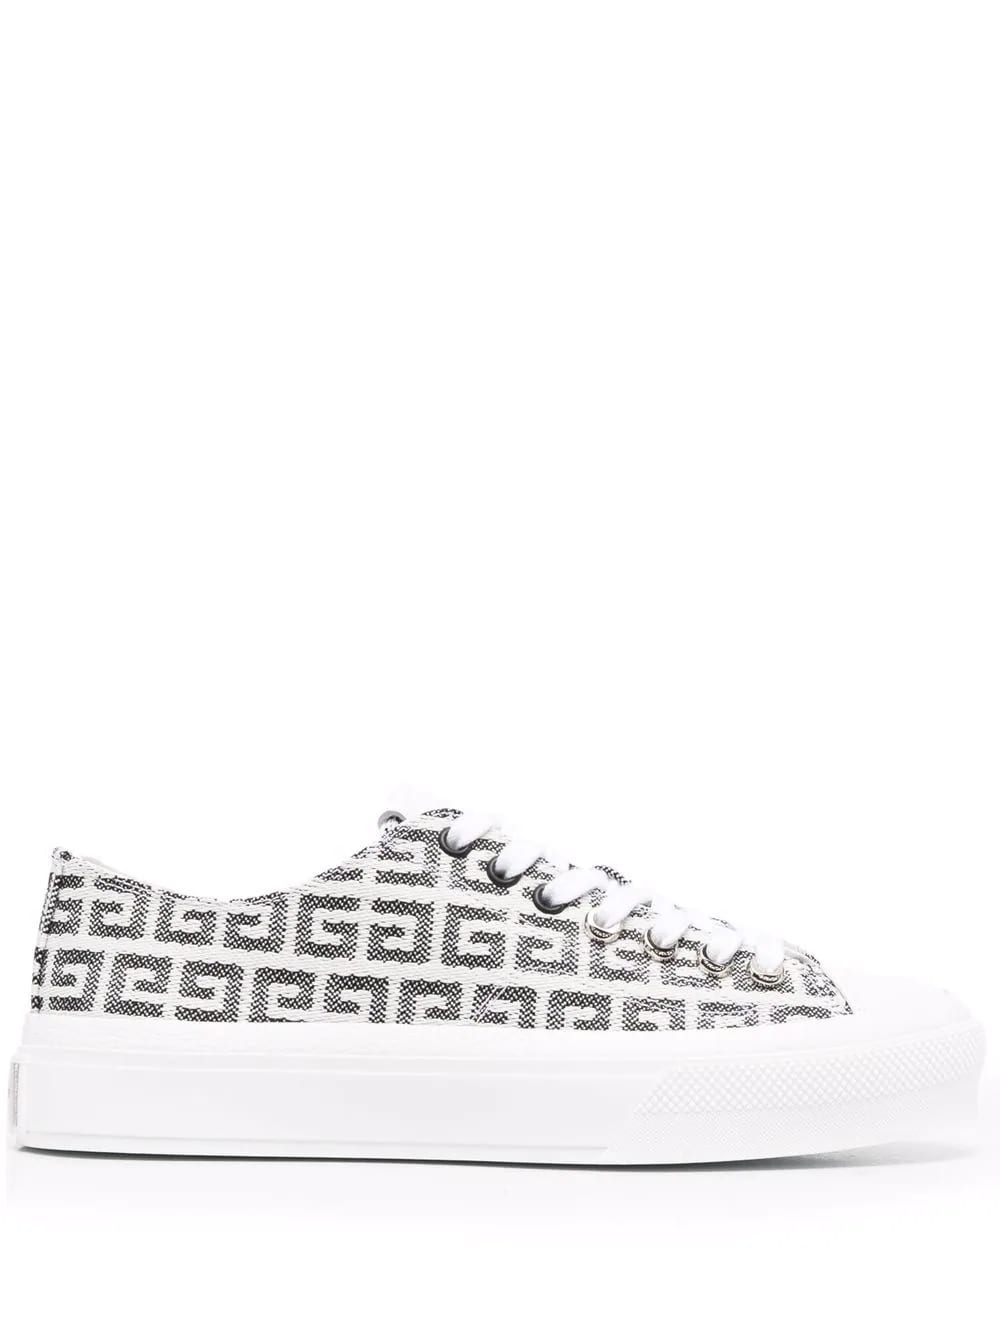 Givenchy Woman City Sneakers In Grey And White 4g Jacquard